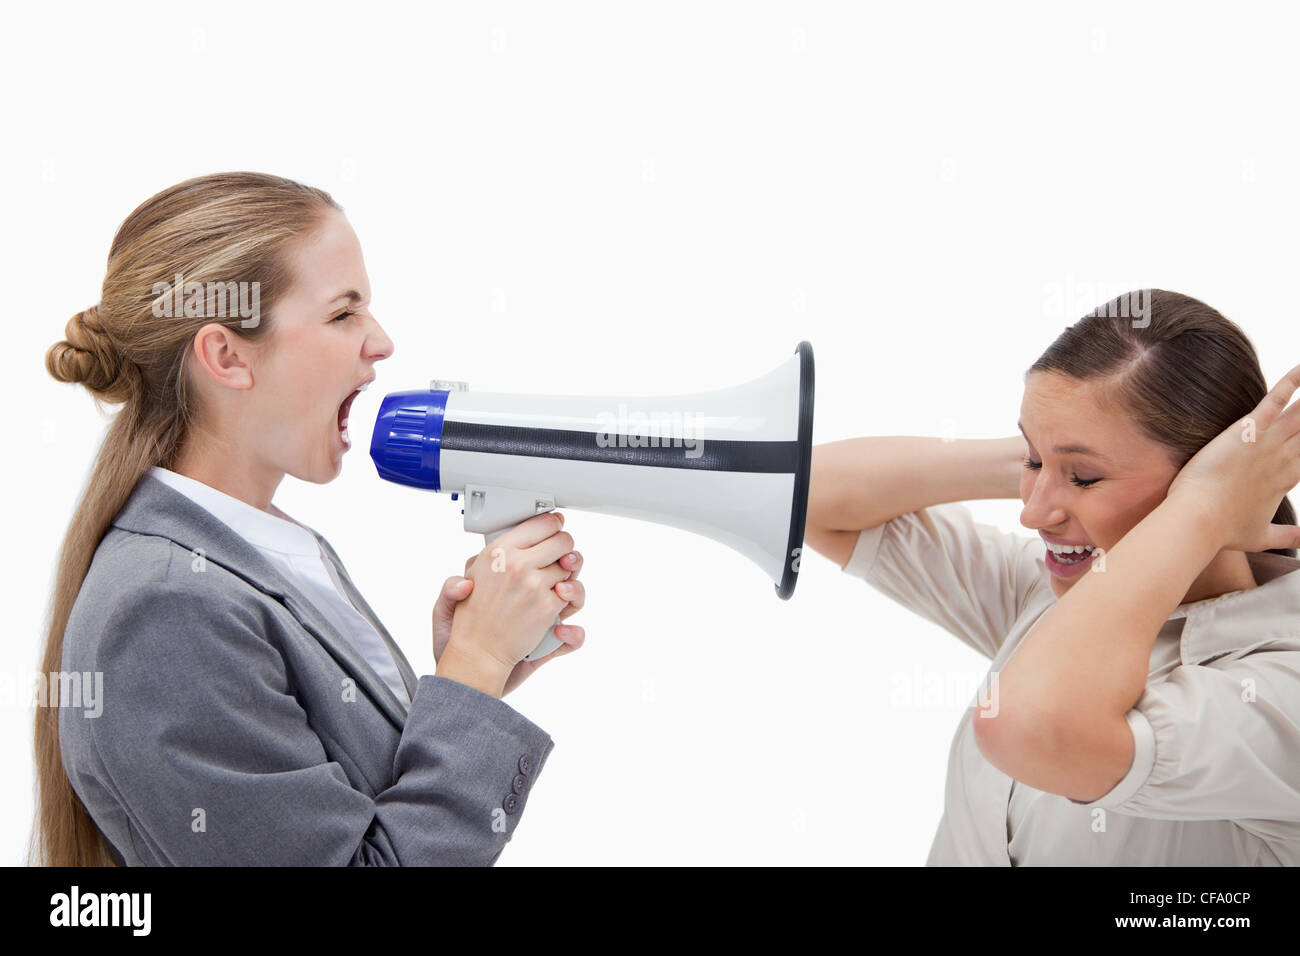 Manager yelling at her coworker through a megaphone Stock Photo